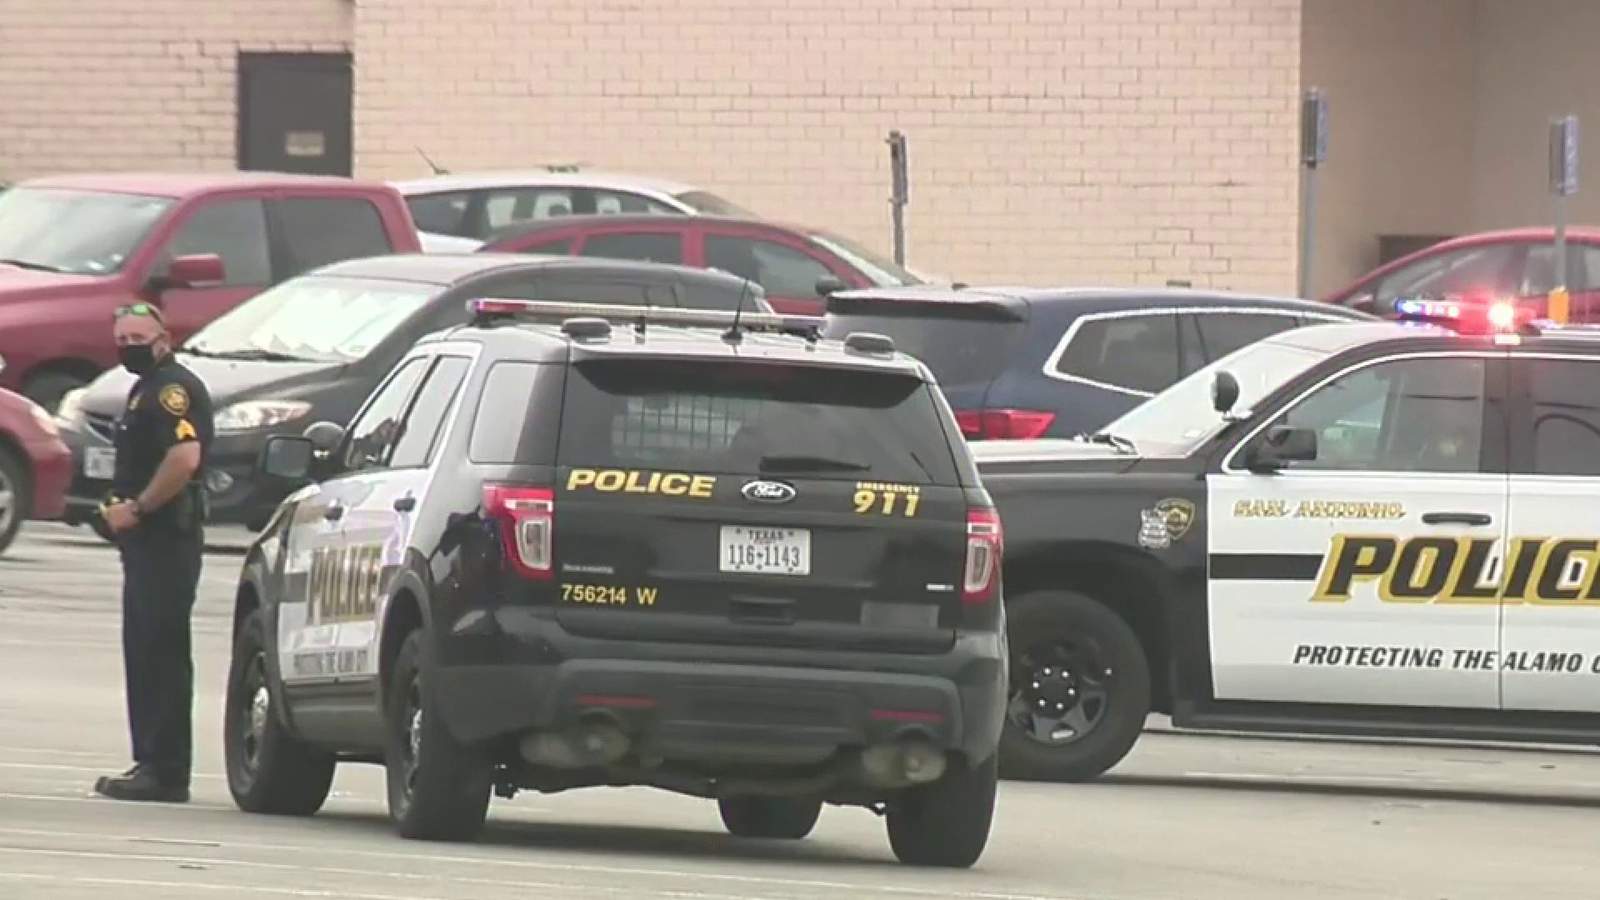 Shooting involving 6 teens at Ingram Park Mall injures 1 after round ricochets off ground